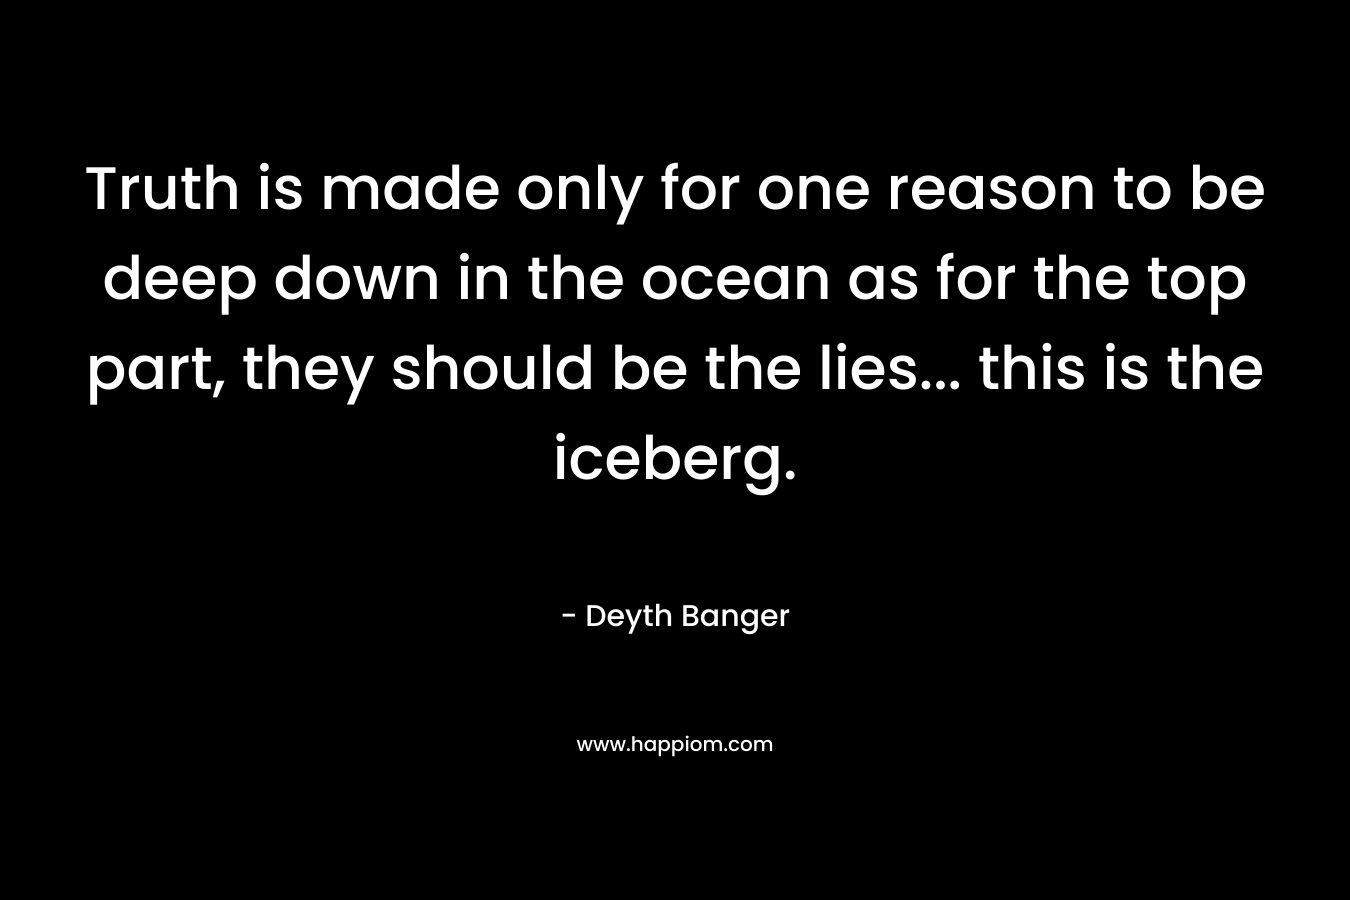 Truth is made only for one reason to be deep down in the ocean as for the top part, they should be the lies... this is the iceberg.